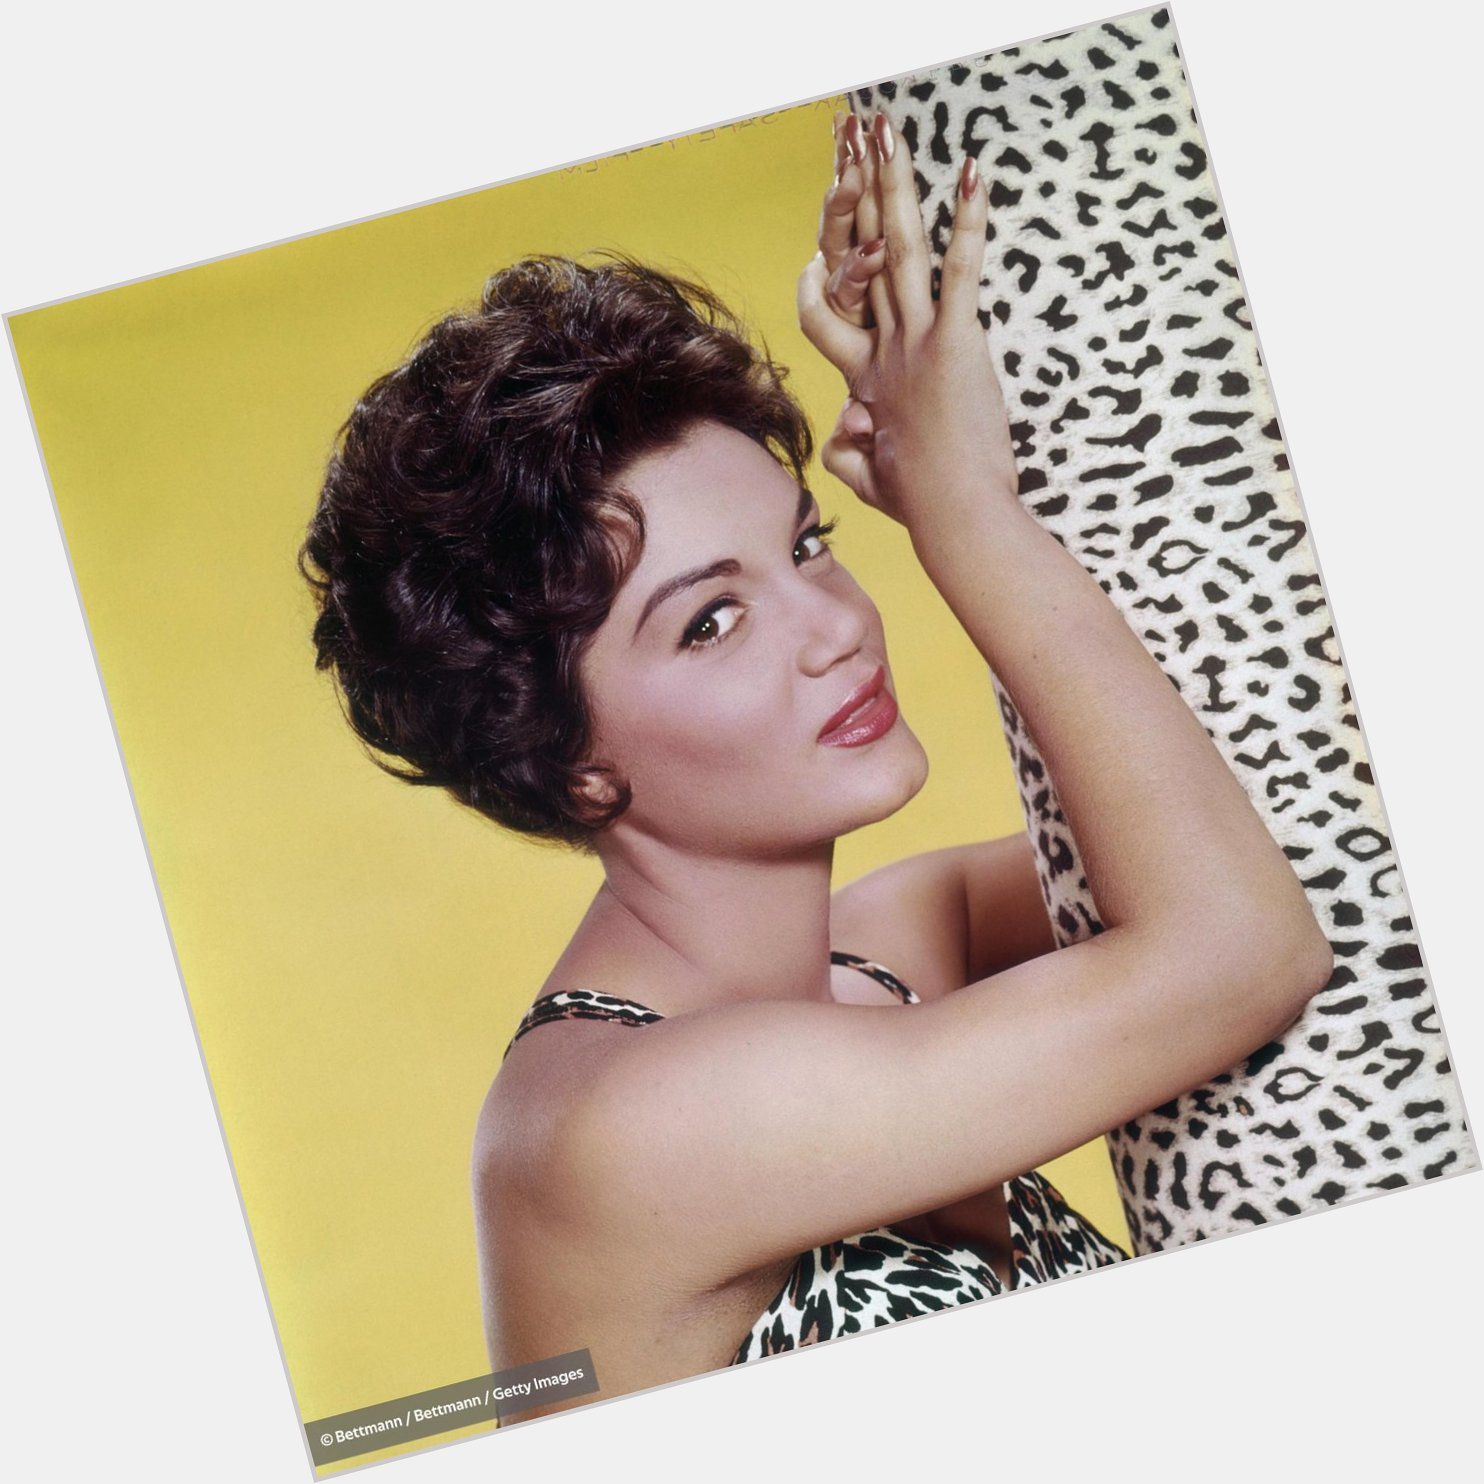 Please join us here at in wishing the one and only Connie Francis a very Happy Birthday today  